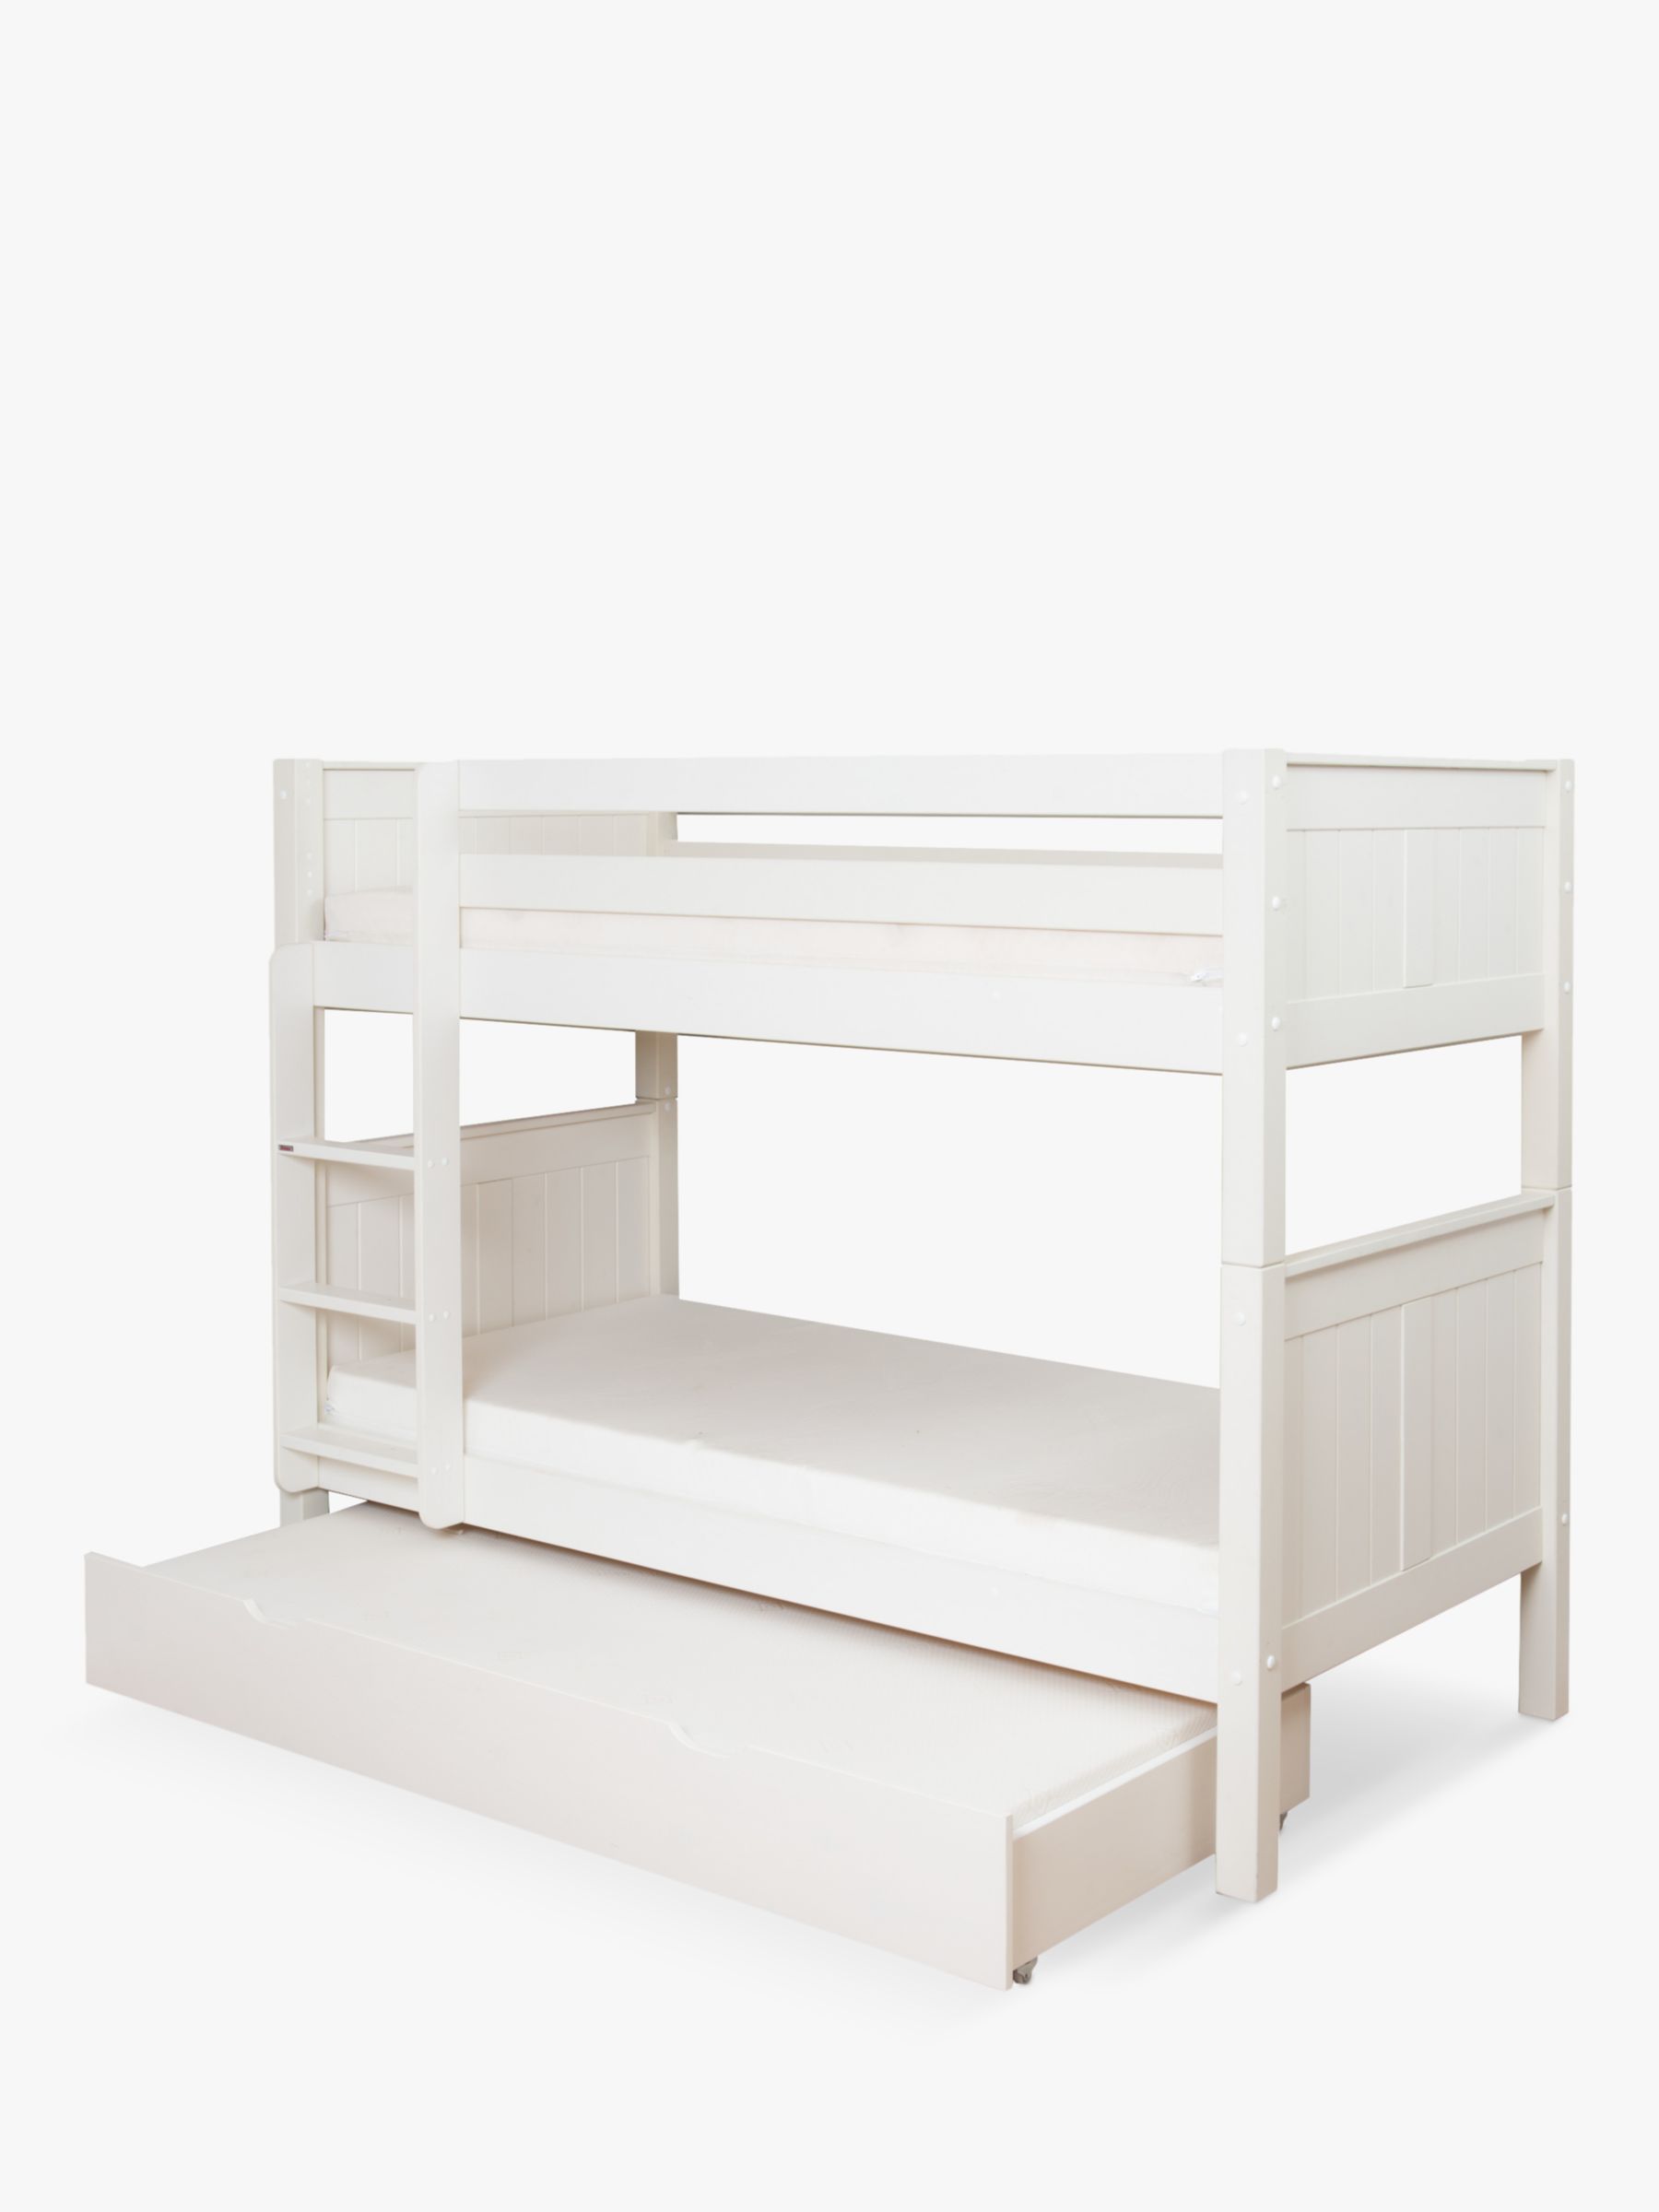 Bunk Beds John Lewis Partners, Show Me Pictures Of Bunk Beds